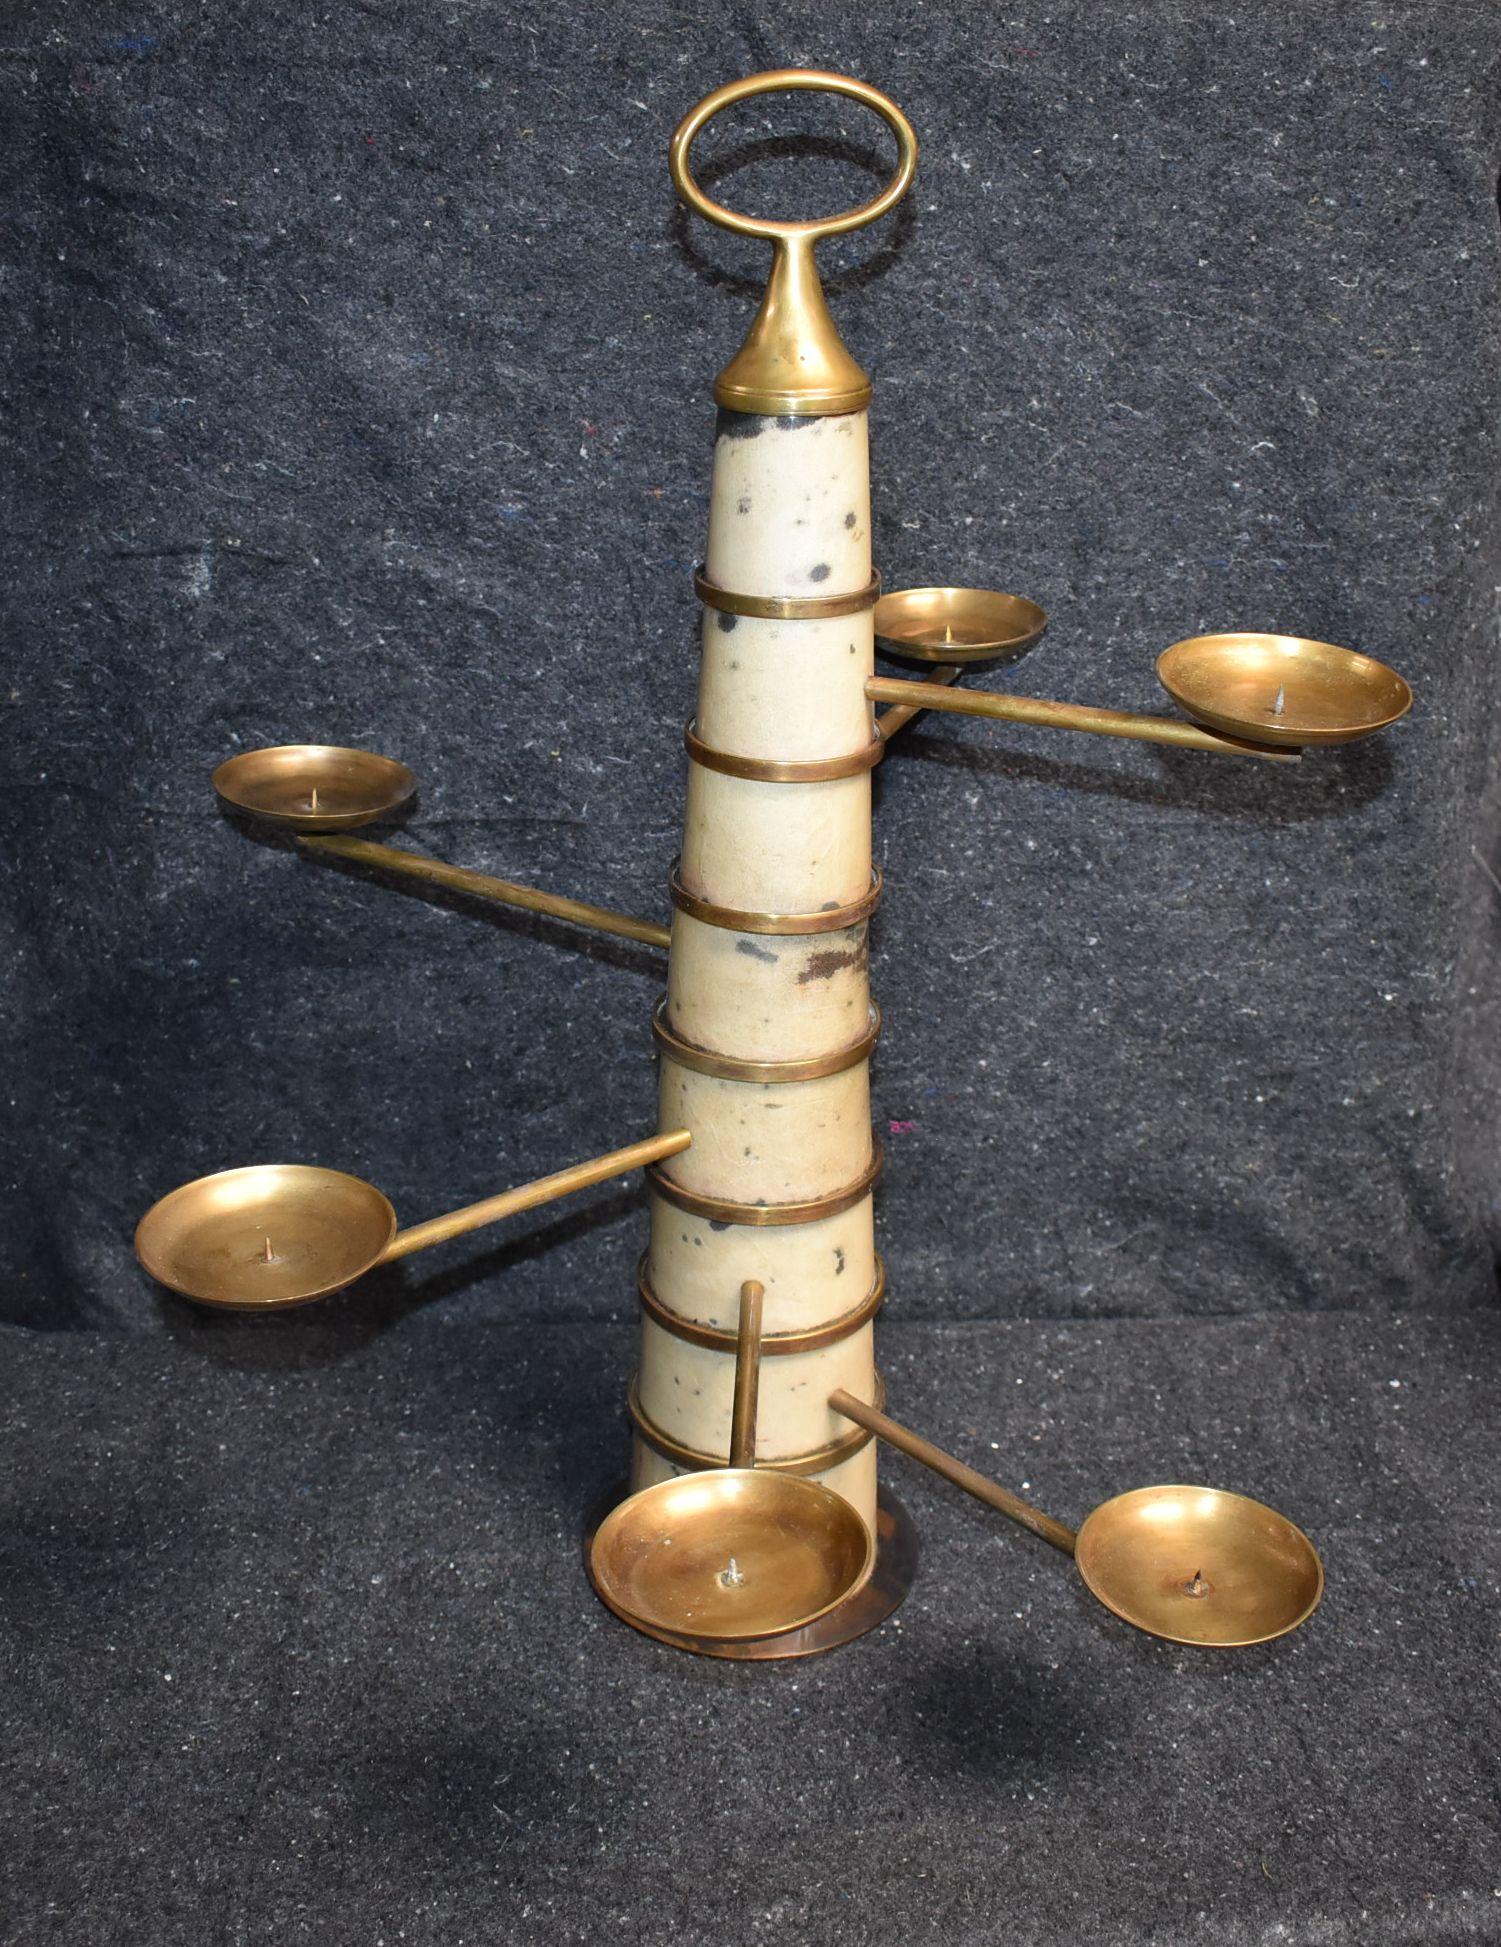 Candlestick with six brass arms (Each Arm Rotate) cover with goatskin and brass details.
Parchment is in varying shades of very light and dark gray. (High gloss polyester resin filled finish).

Additional dimension:
Diam. of extended arms: 24